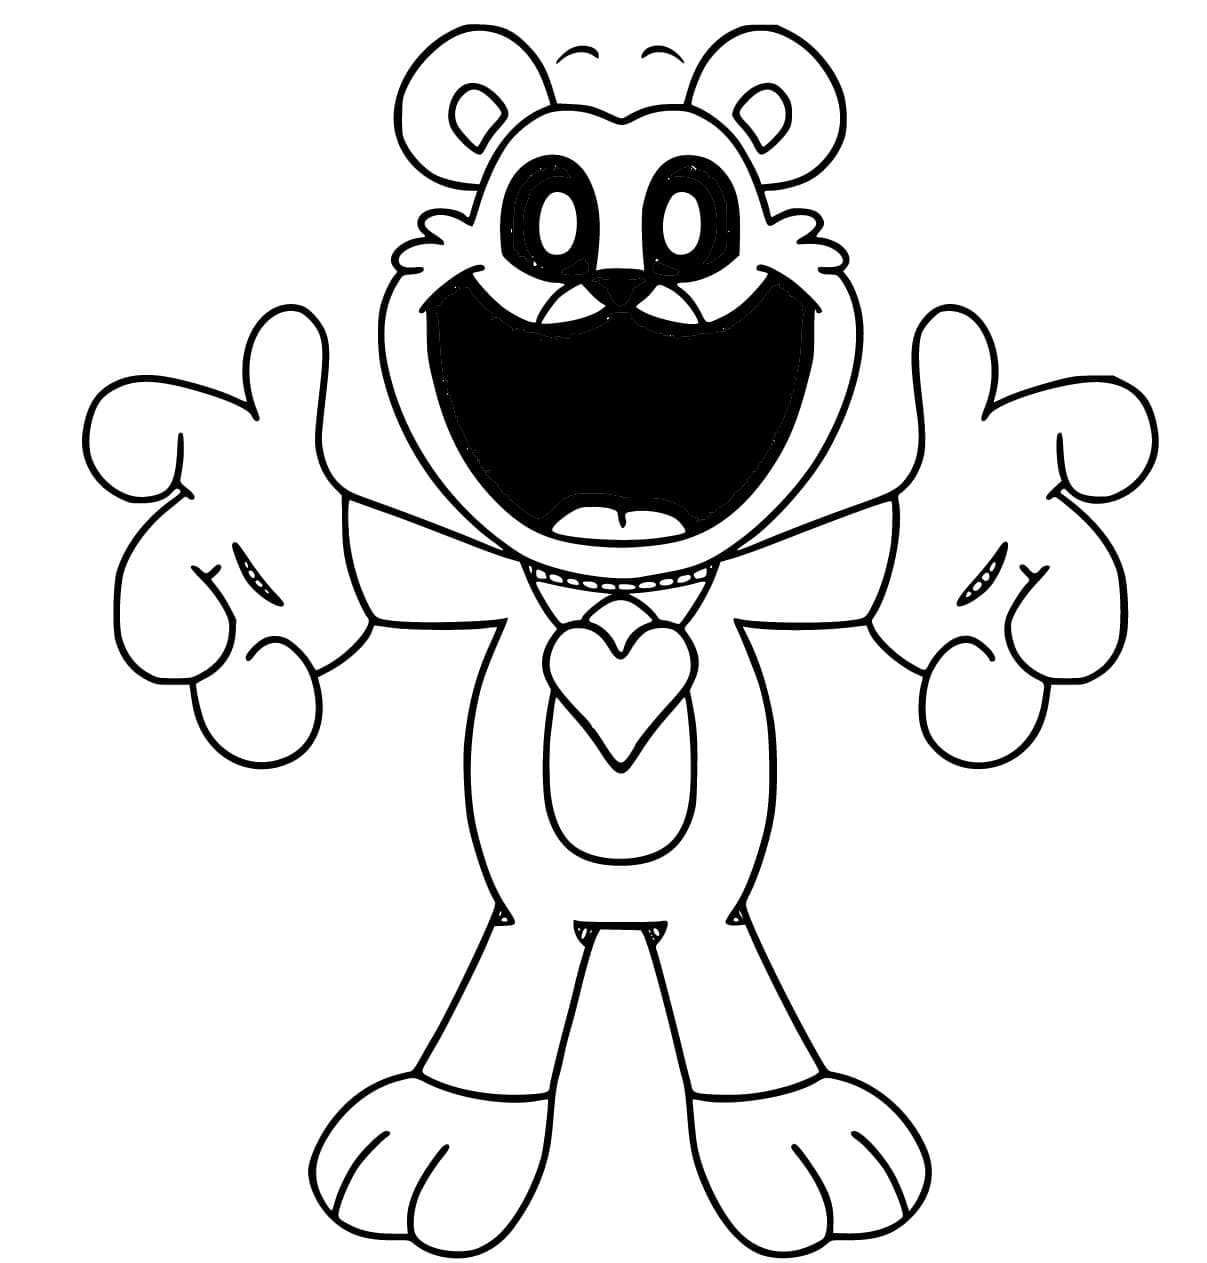 Bobby BearHug Smiling Critters coloring page